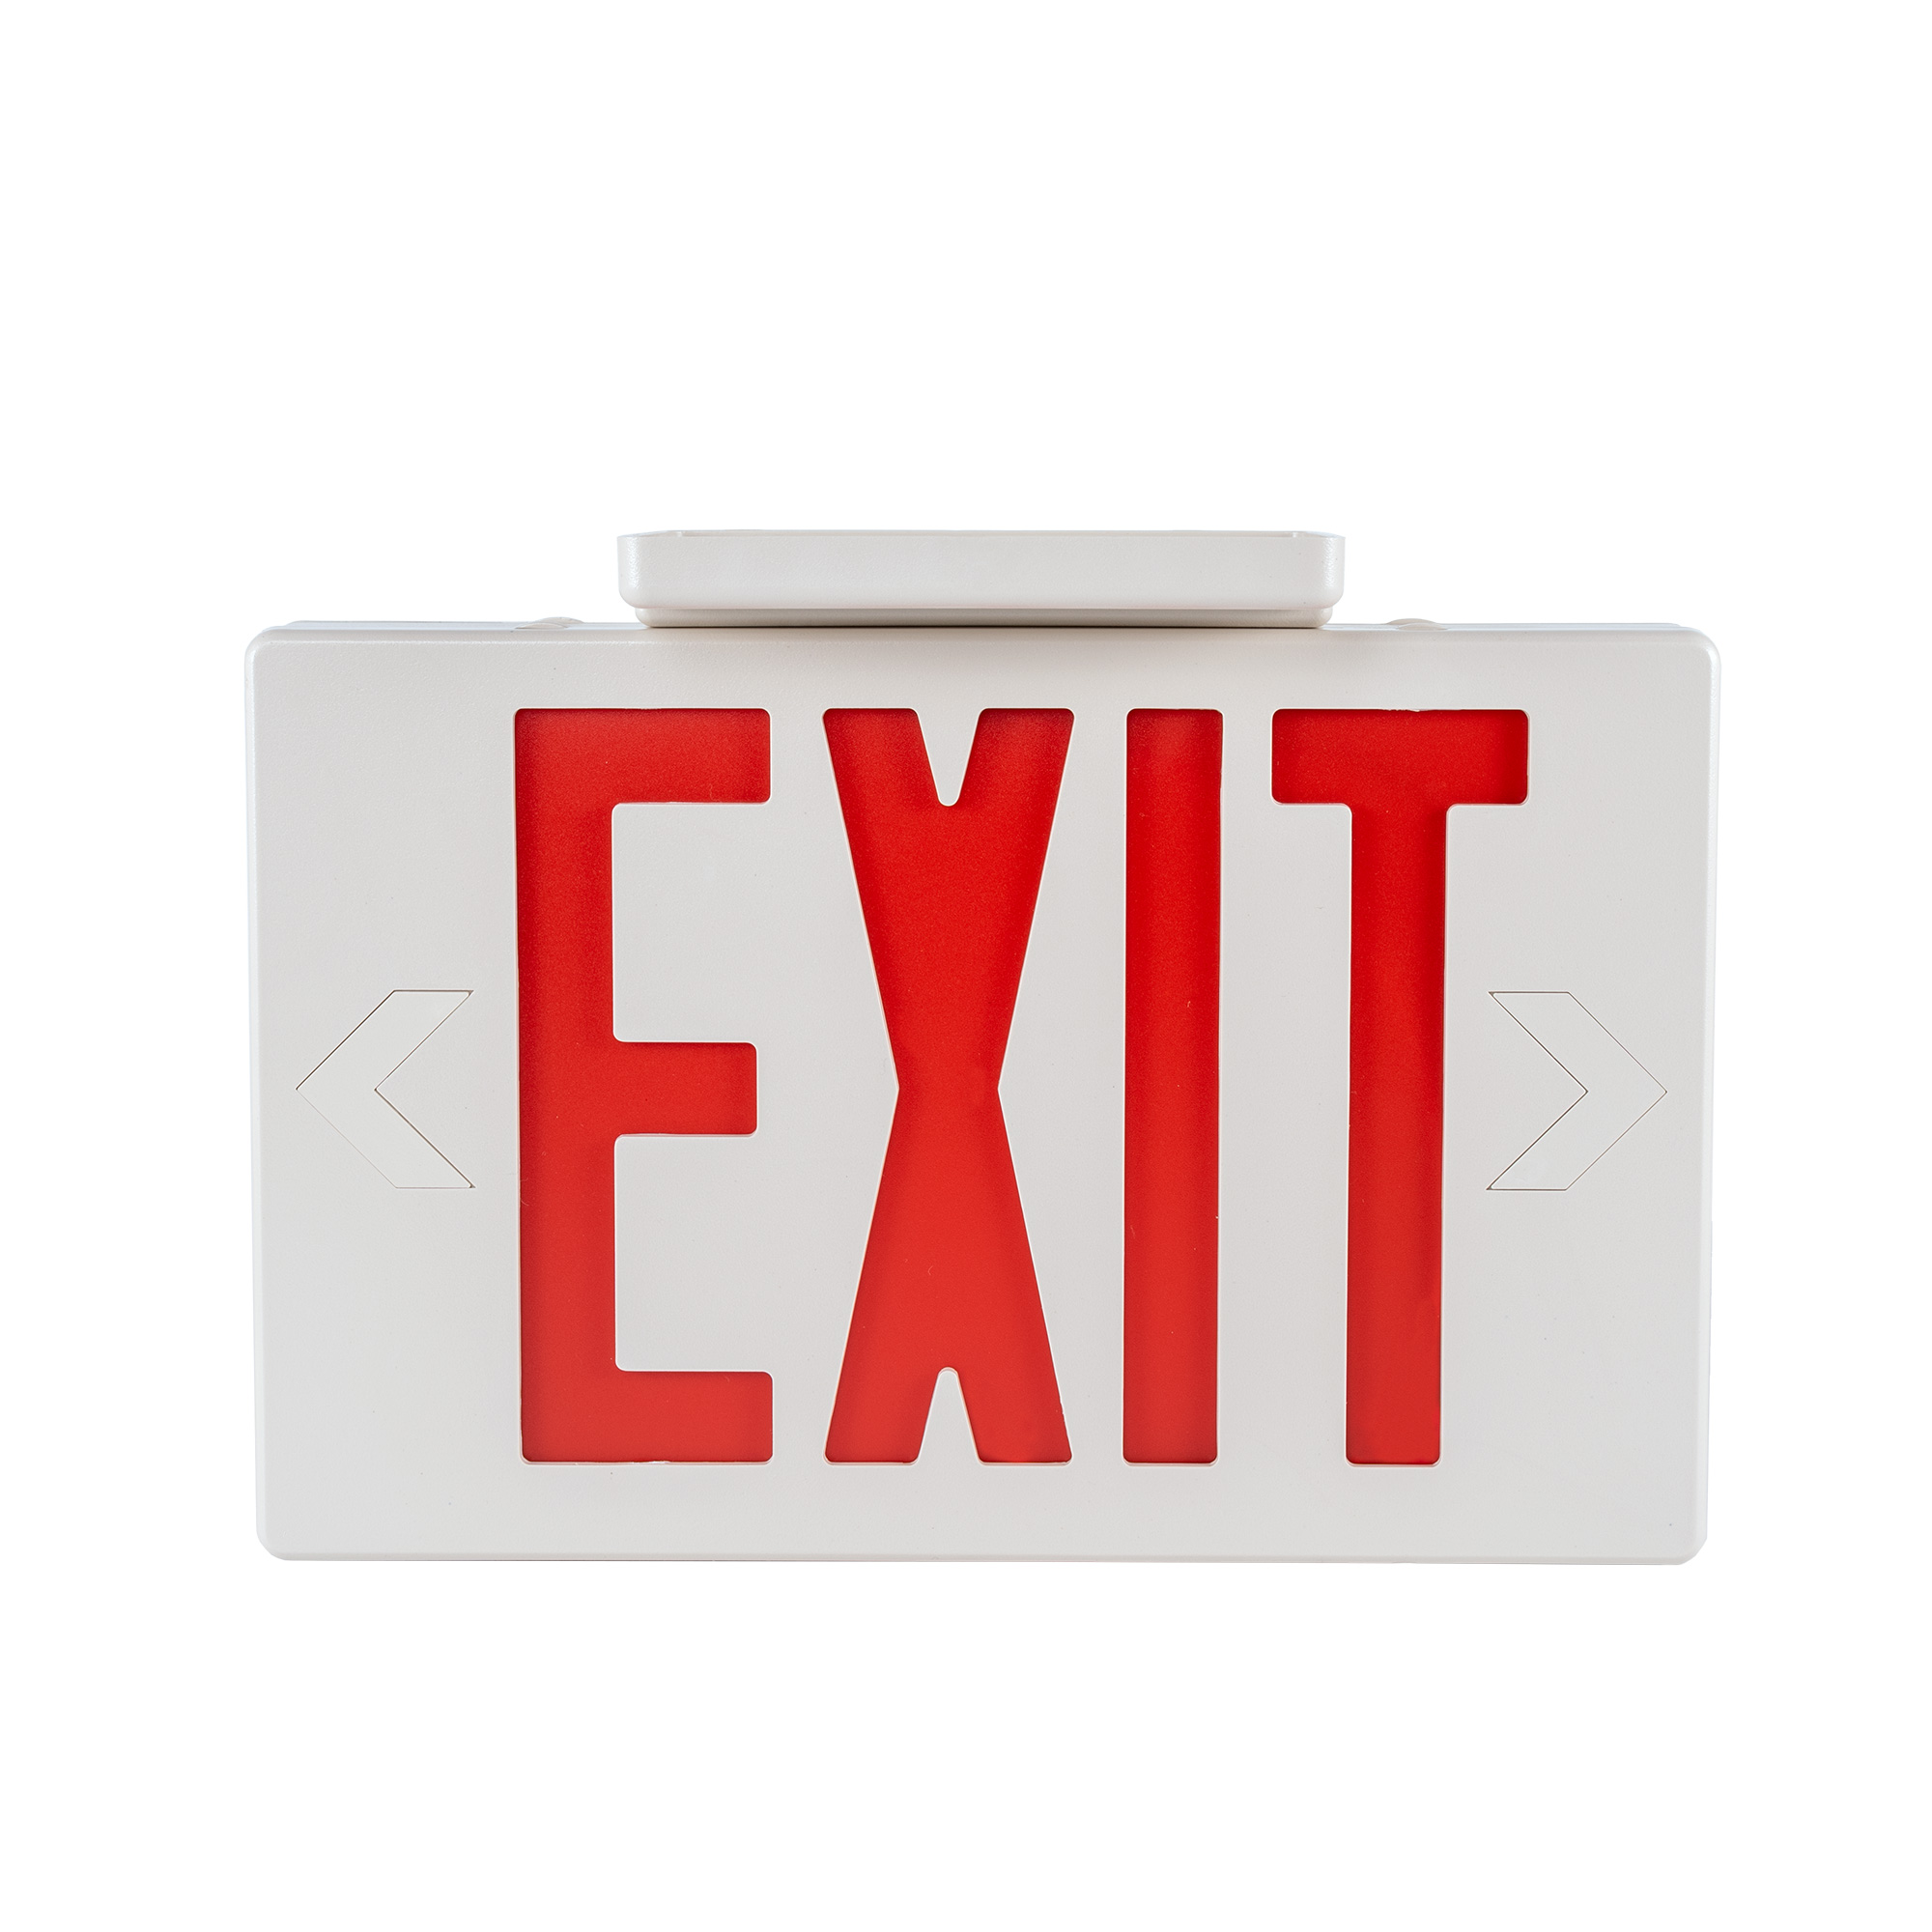 Gruenlich LED Emergency EXIT Sign with Double Face and Back Up Batteries- US Standard Red Letter Exit Lighting, UL 924 Qualified, 120-277 Voltage (2-Pack)